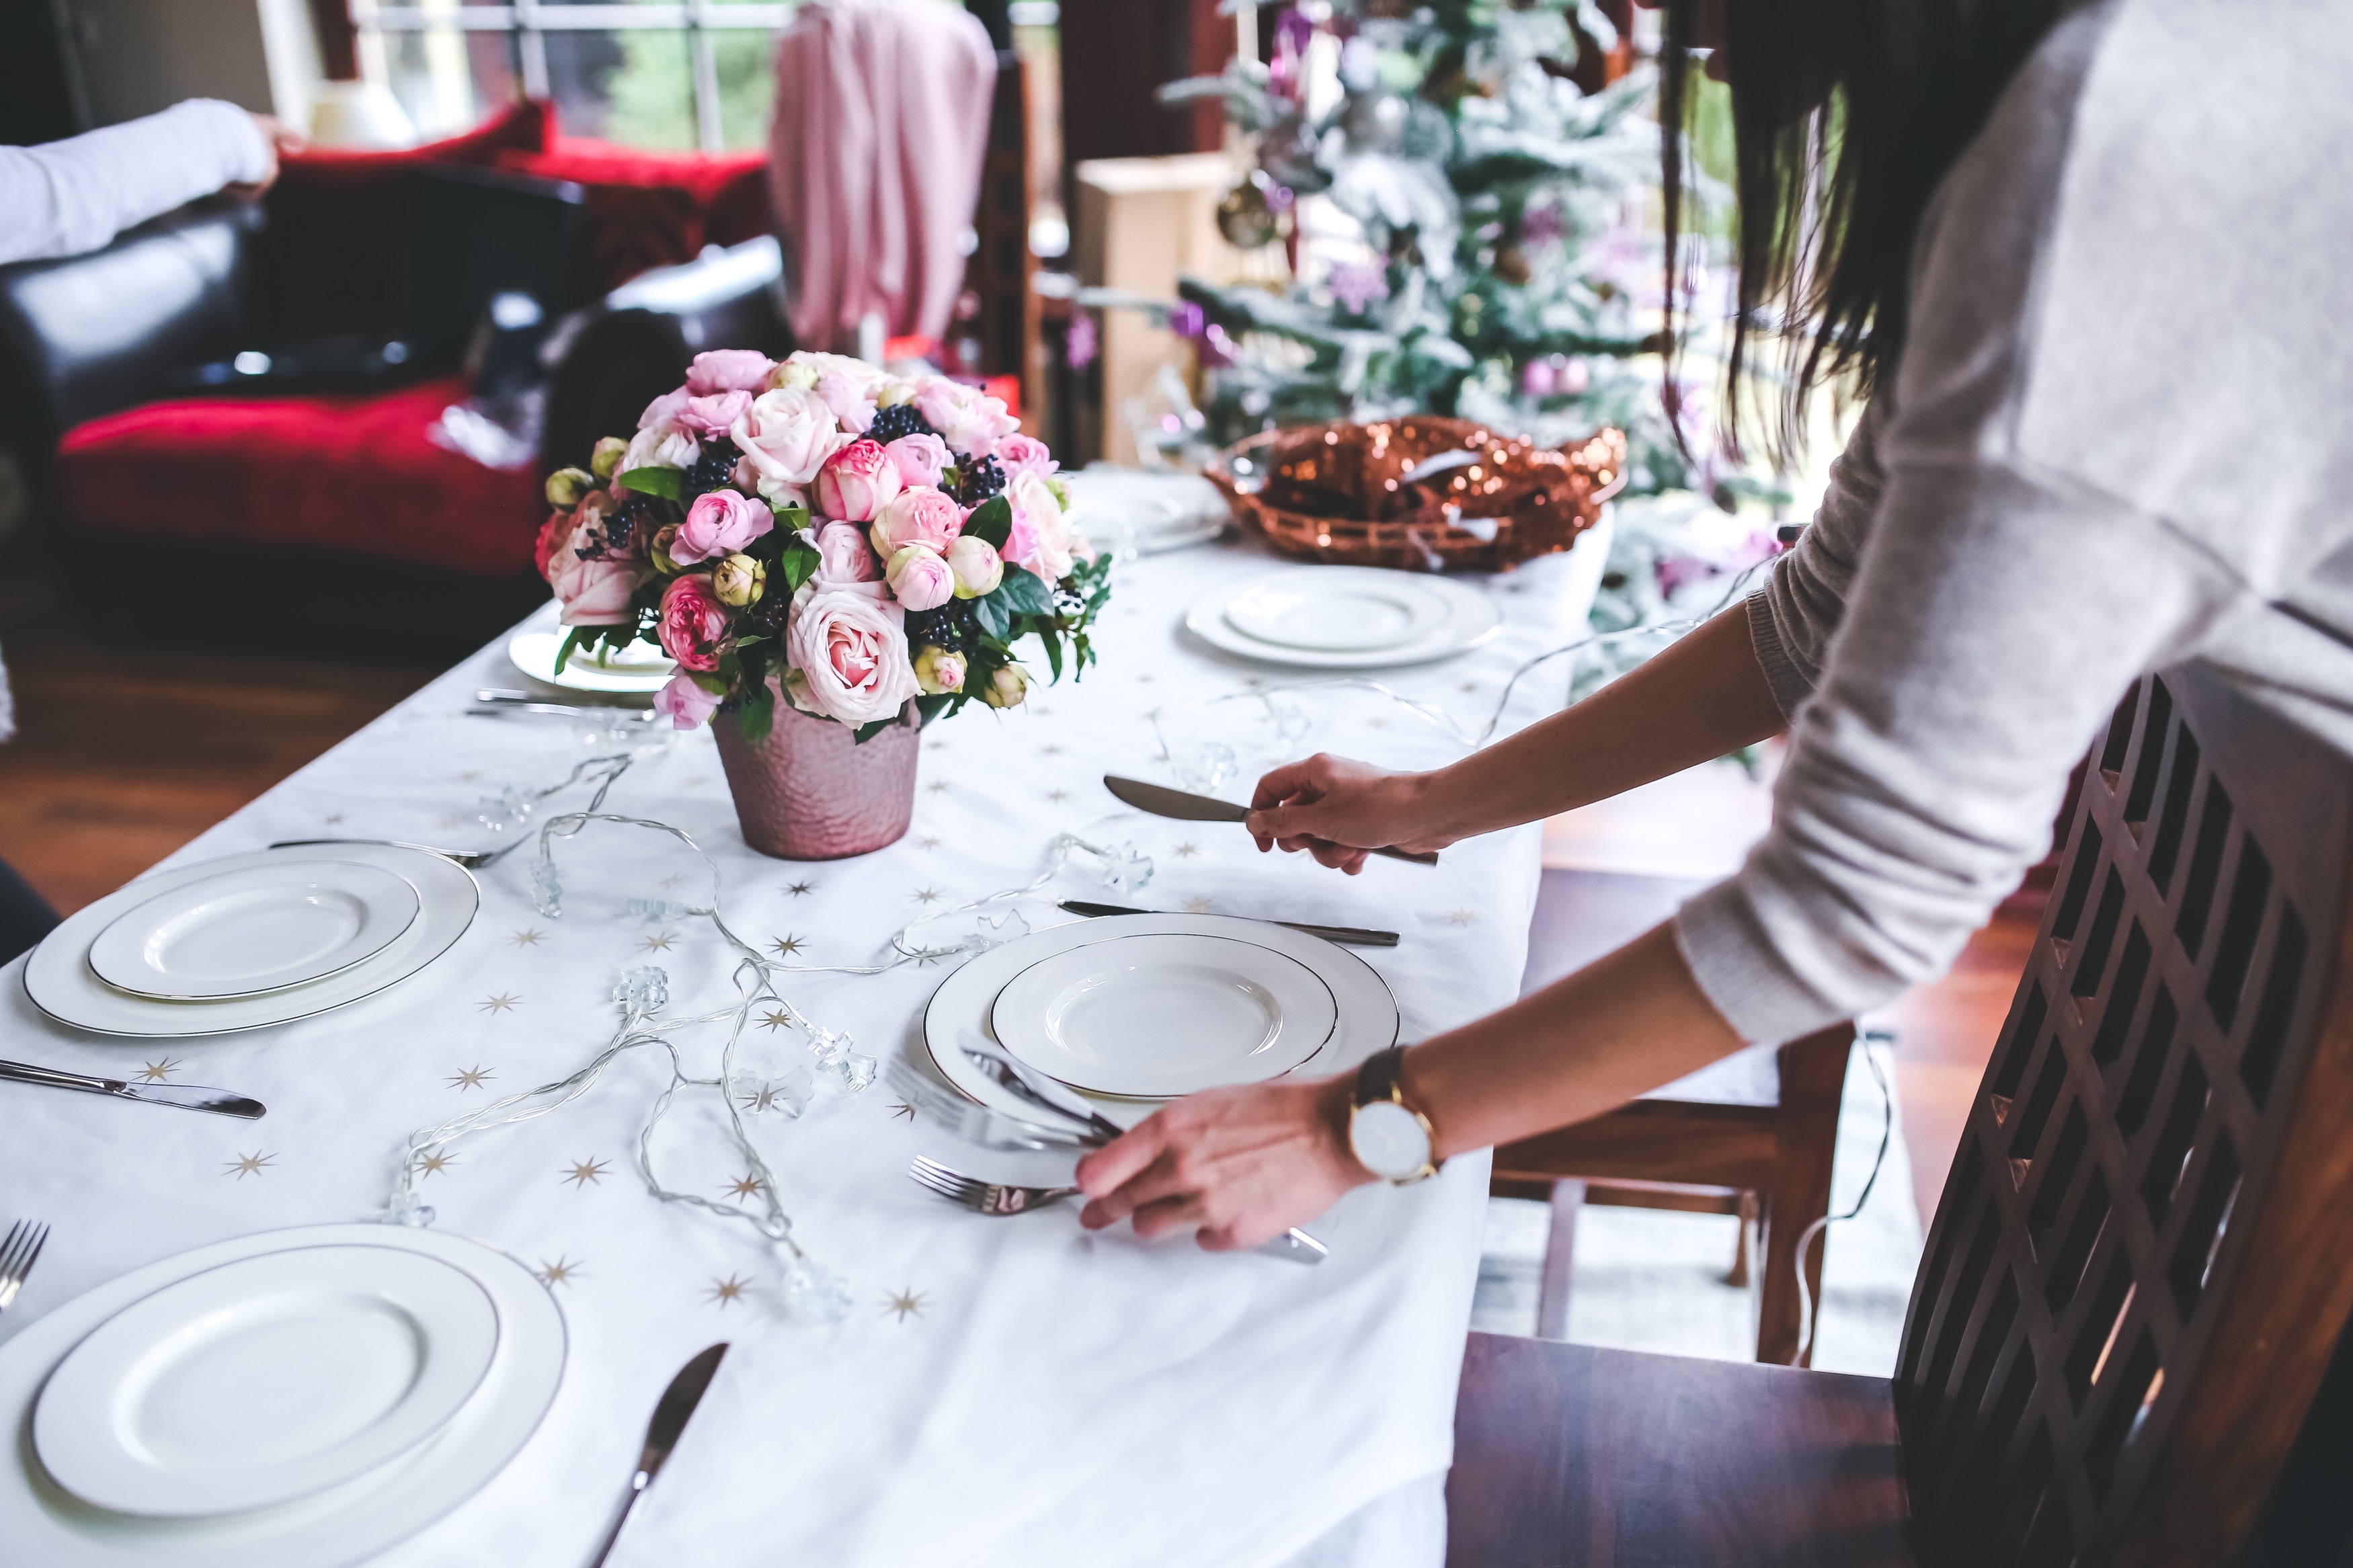 6 Tips To Guilt-Free Holiday Eating